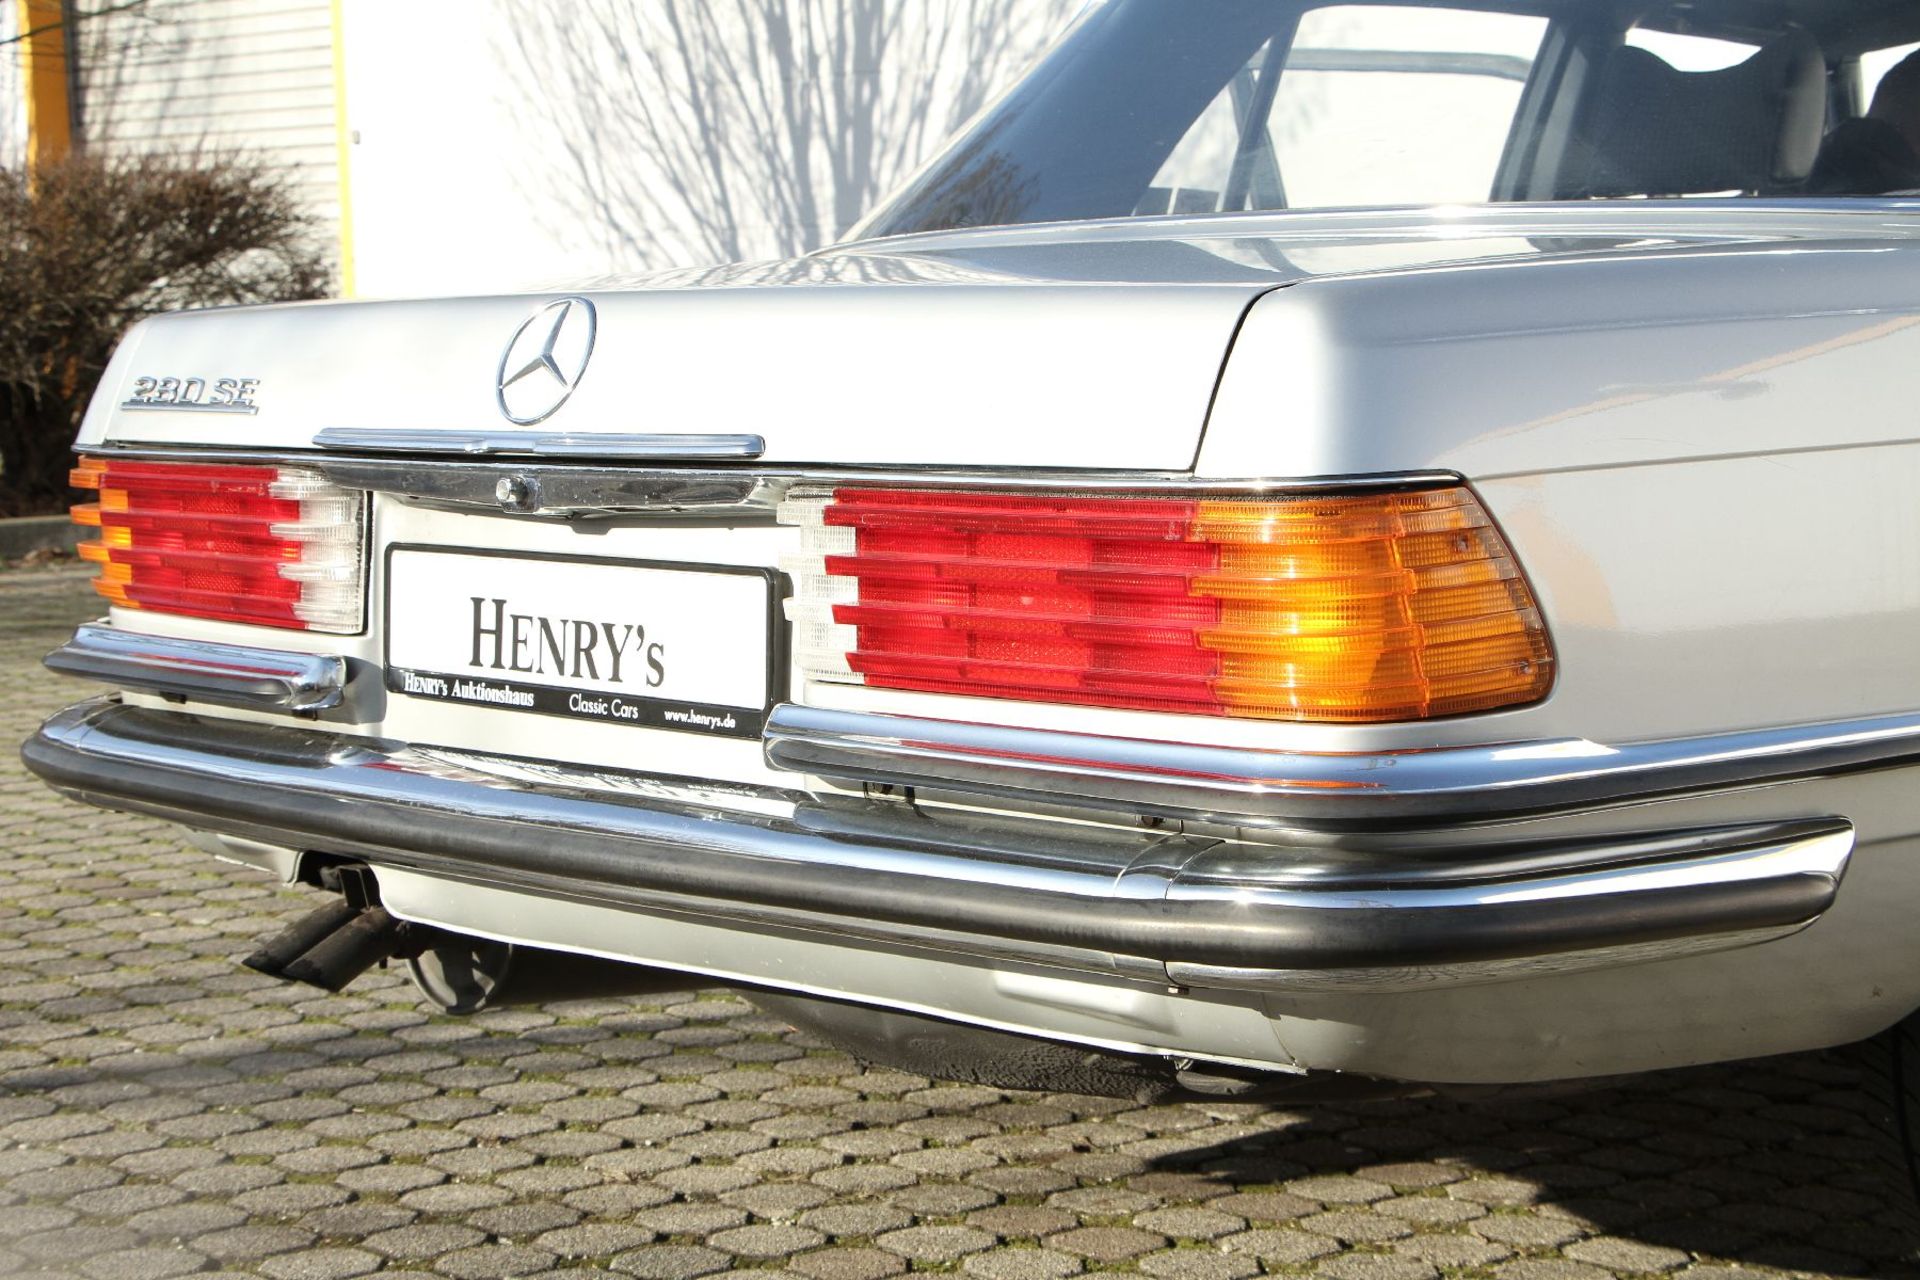 Mercedes-Benz 280S Limousine, Chassis Number: 11602010089338, first registered 08/1977, 2 owners, - Bild 5 aus 14